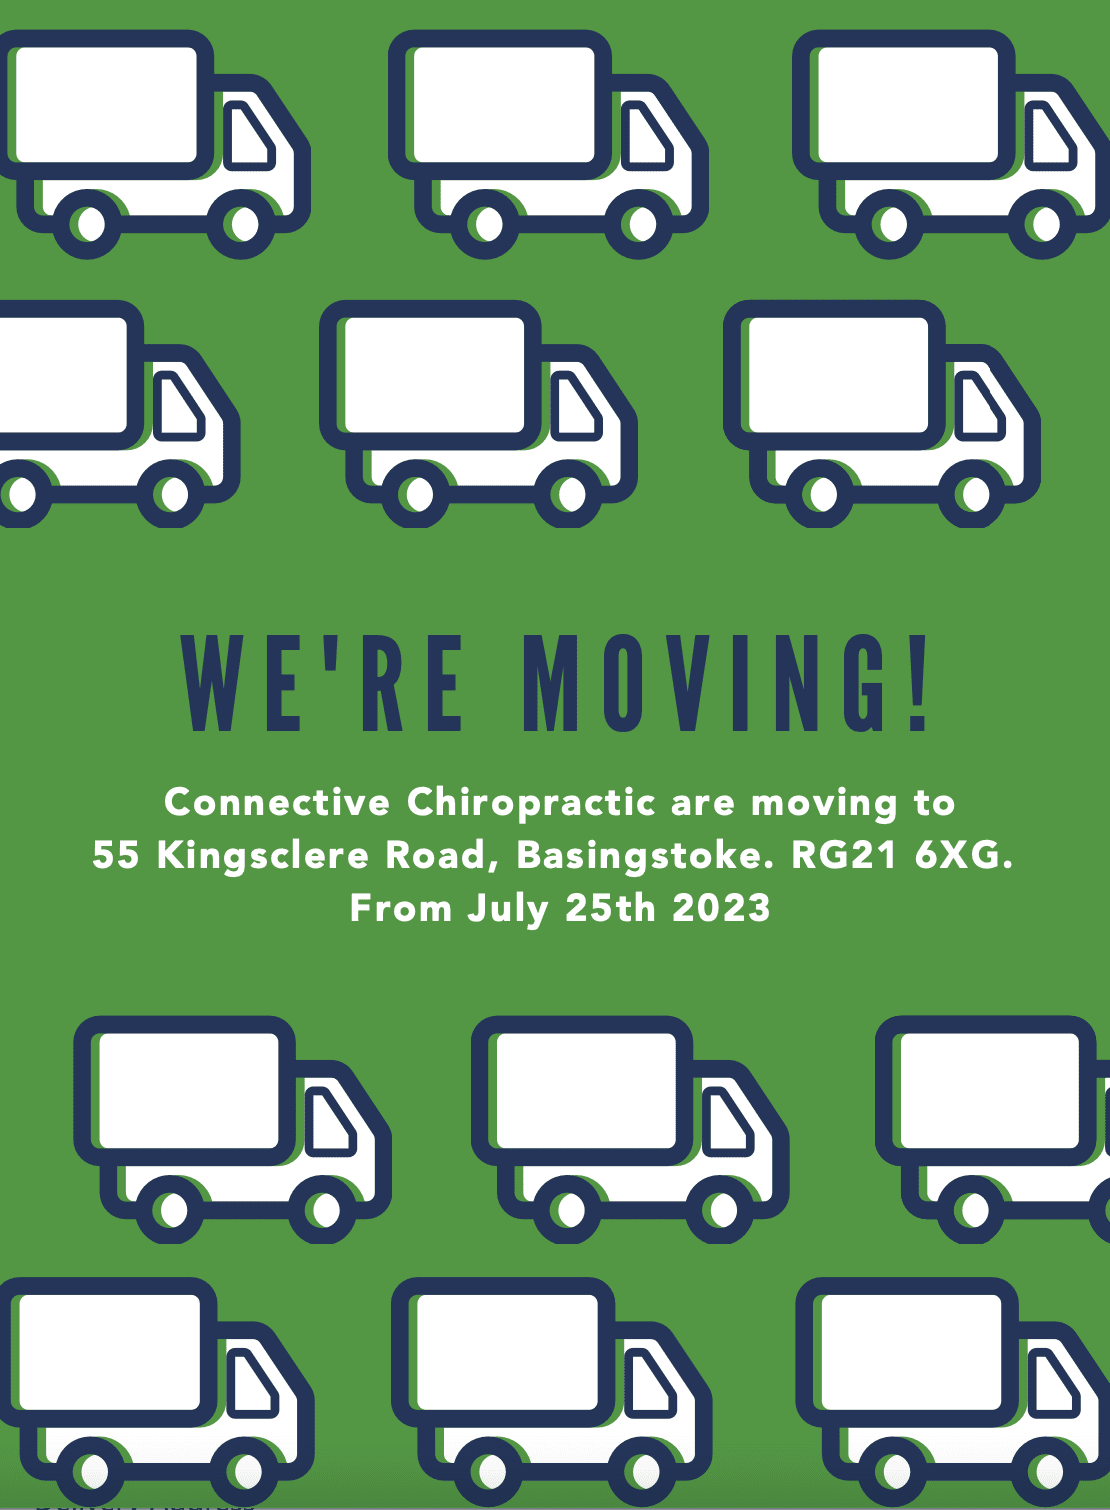 Connective Chiropractic are moving